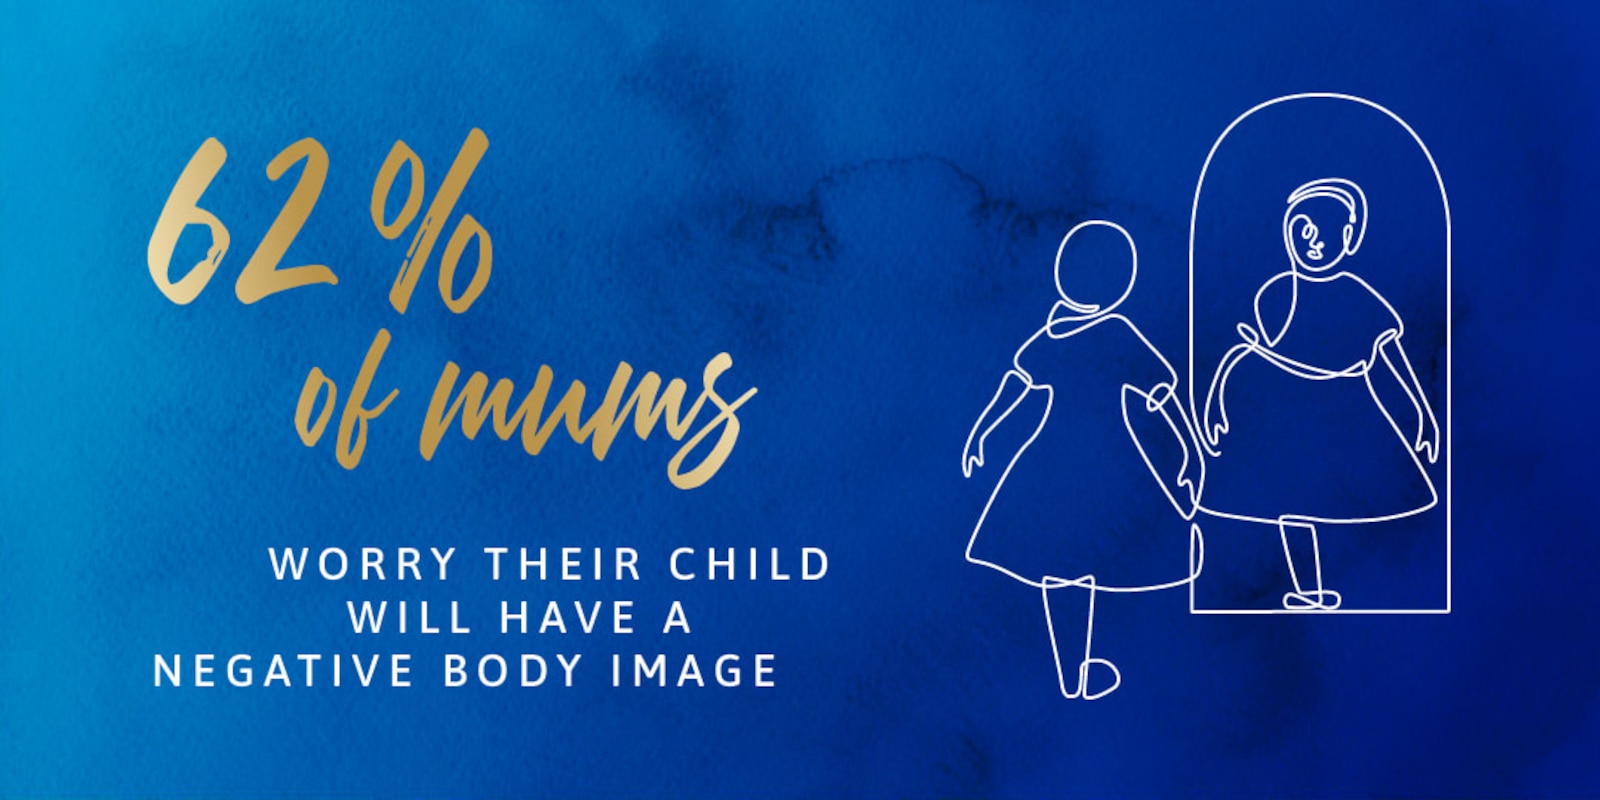 62% of mums worry their child will have a negative body image